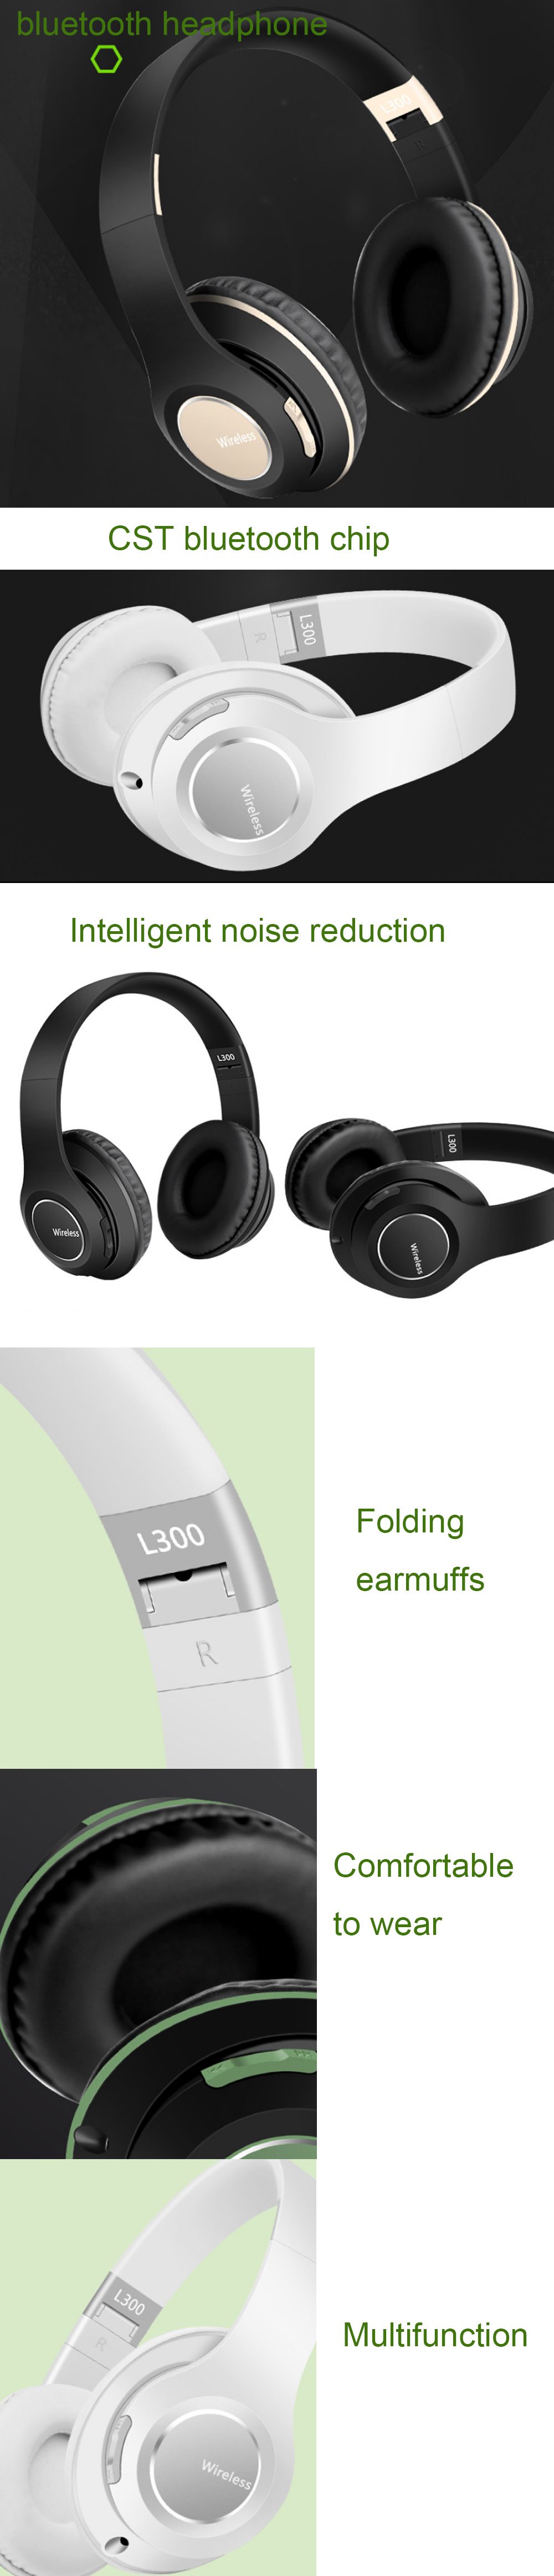 L300-bluetooth42-Wireless-Stereo-Noise-Canceling-Gaming-Headphone-Folding-Rechargeable-Headset-for-M-1593962